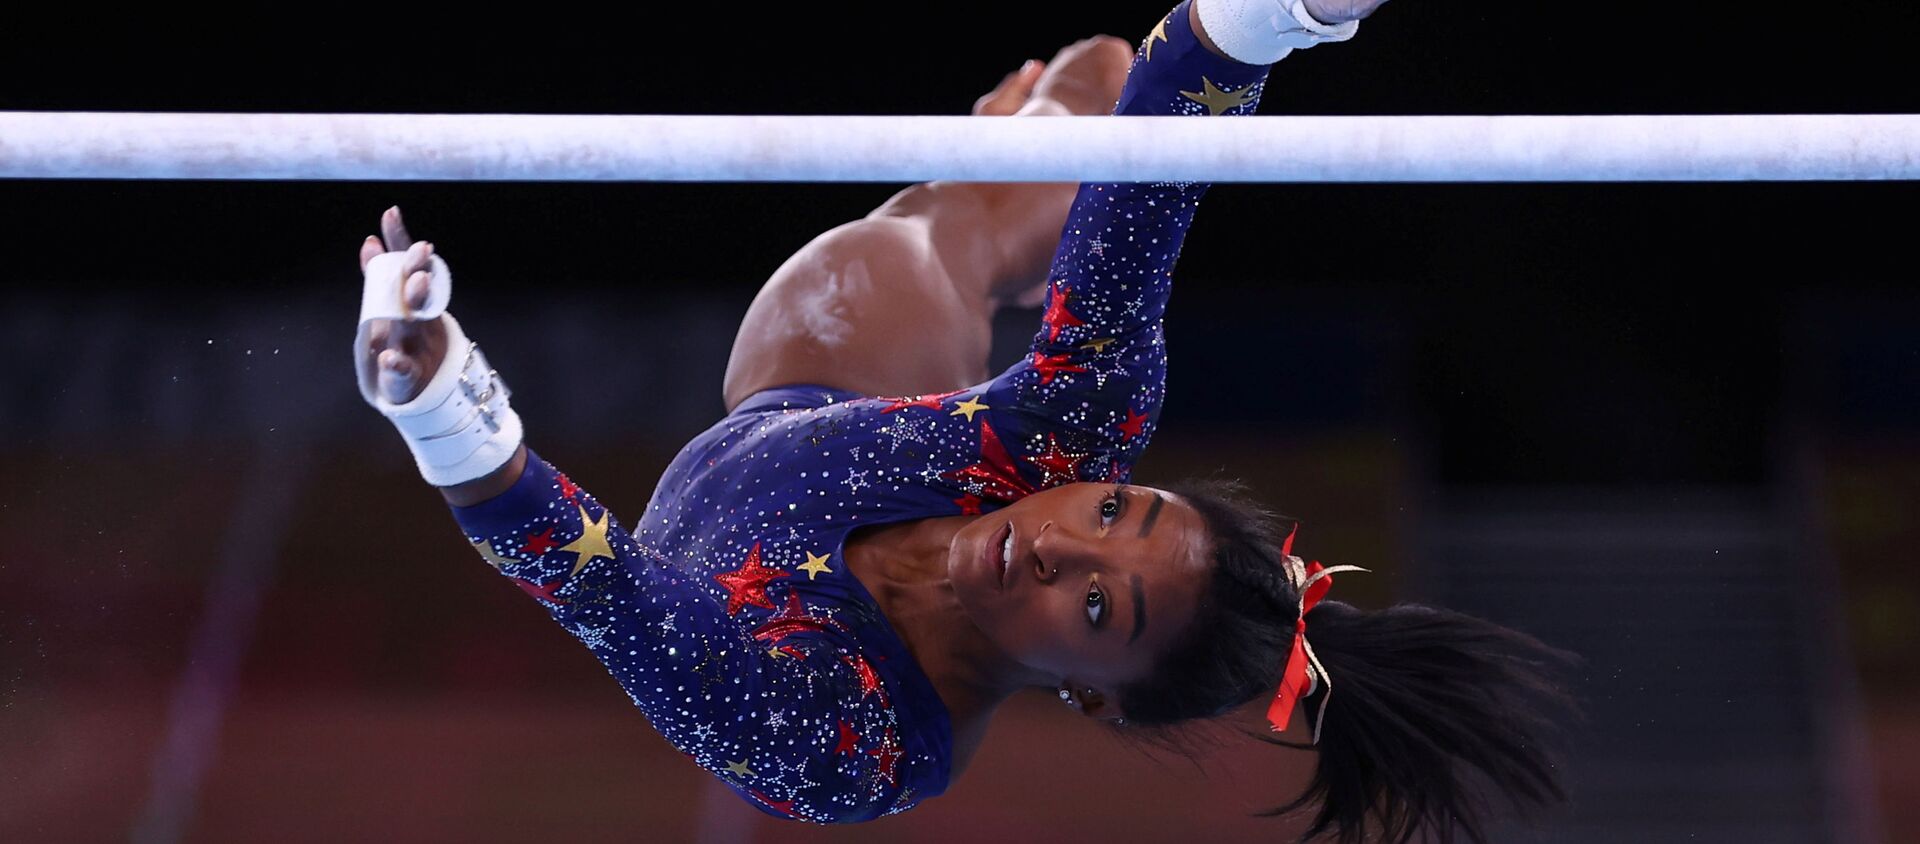 Tokyo 2020 Olympics - Gymnastics - Artistic - Women's Uneven Bars - Qualification - Ariake Gymnastics Centre, Tokyo, Japan - July 25, 2021. Simone Biles of the United States in action during the uneven bars REUTERS/Mike Blake/File photo  SEARCH OLYMPICS DAY 3 FOR TOKYO 2020 OLYMPICS EDITOR'S CHOICE, SEARCH REUTERS OLYMPICS TOPIX FOR ALL EDITOR'S CHOICE PICTURES. - Sputnik International, 1920